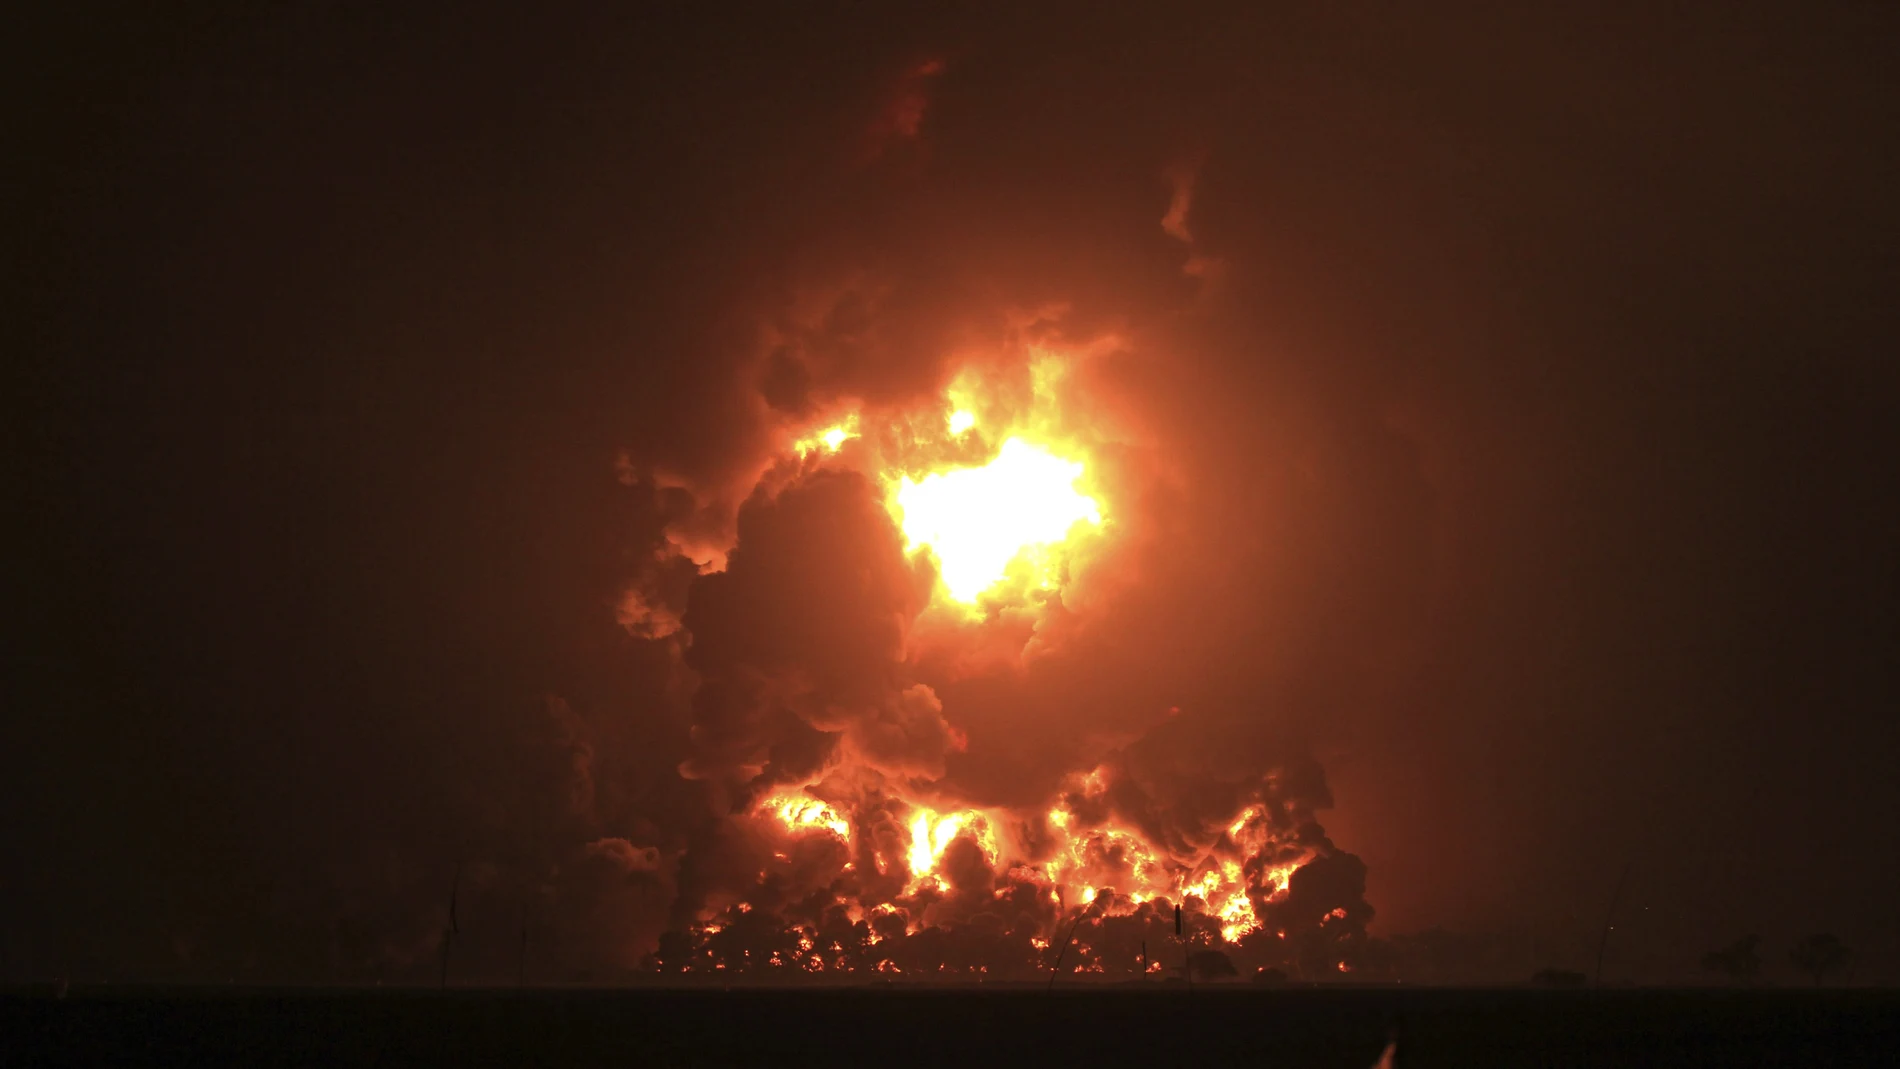 Night sky glows from a fire that razes through Pertamina Balongan Refinery in Indramayu, West Java, Indonesia, early Monday, March 29, 2021. Hundreds of people were evacuated from a nearby village after the massive fire broke out at the refinery. (AP Photo)